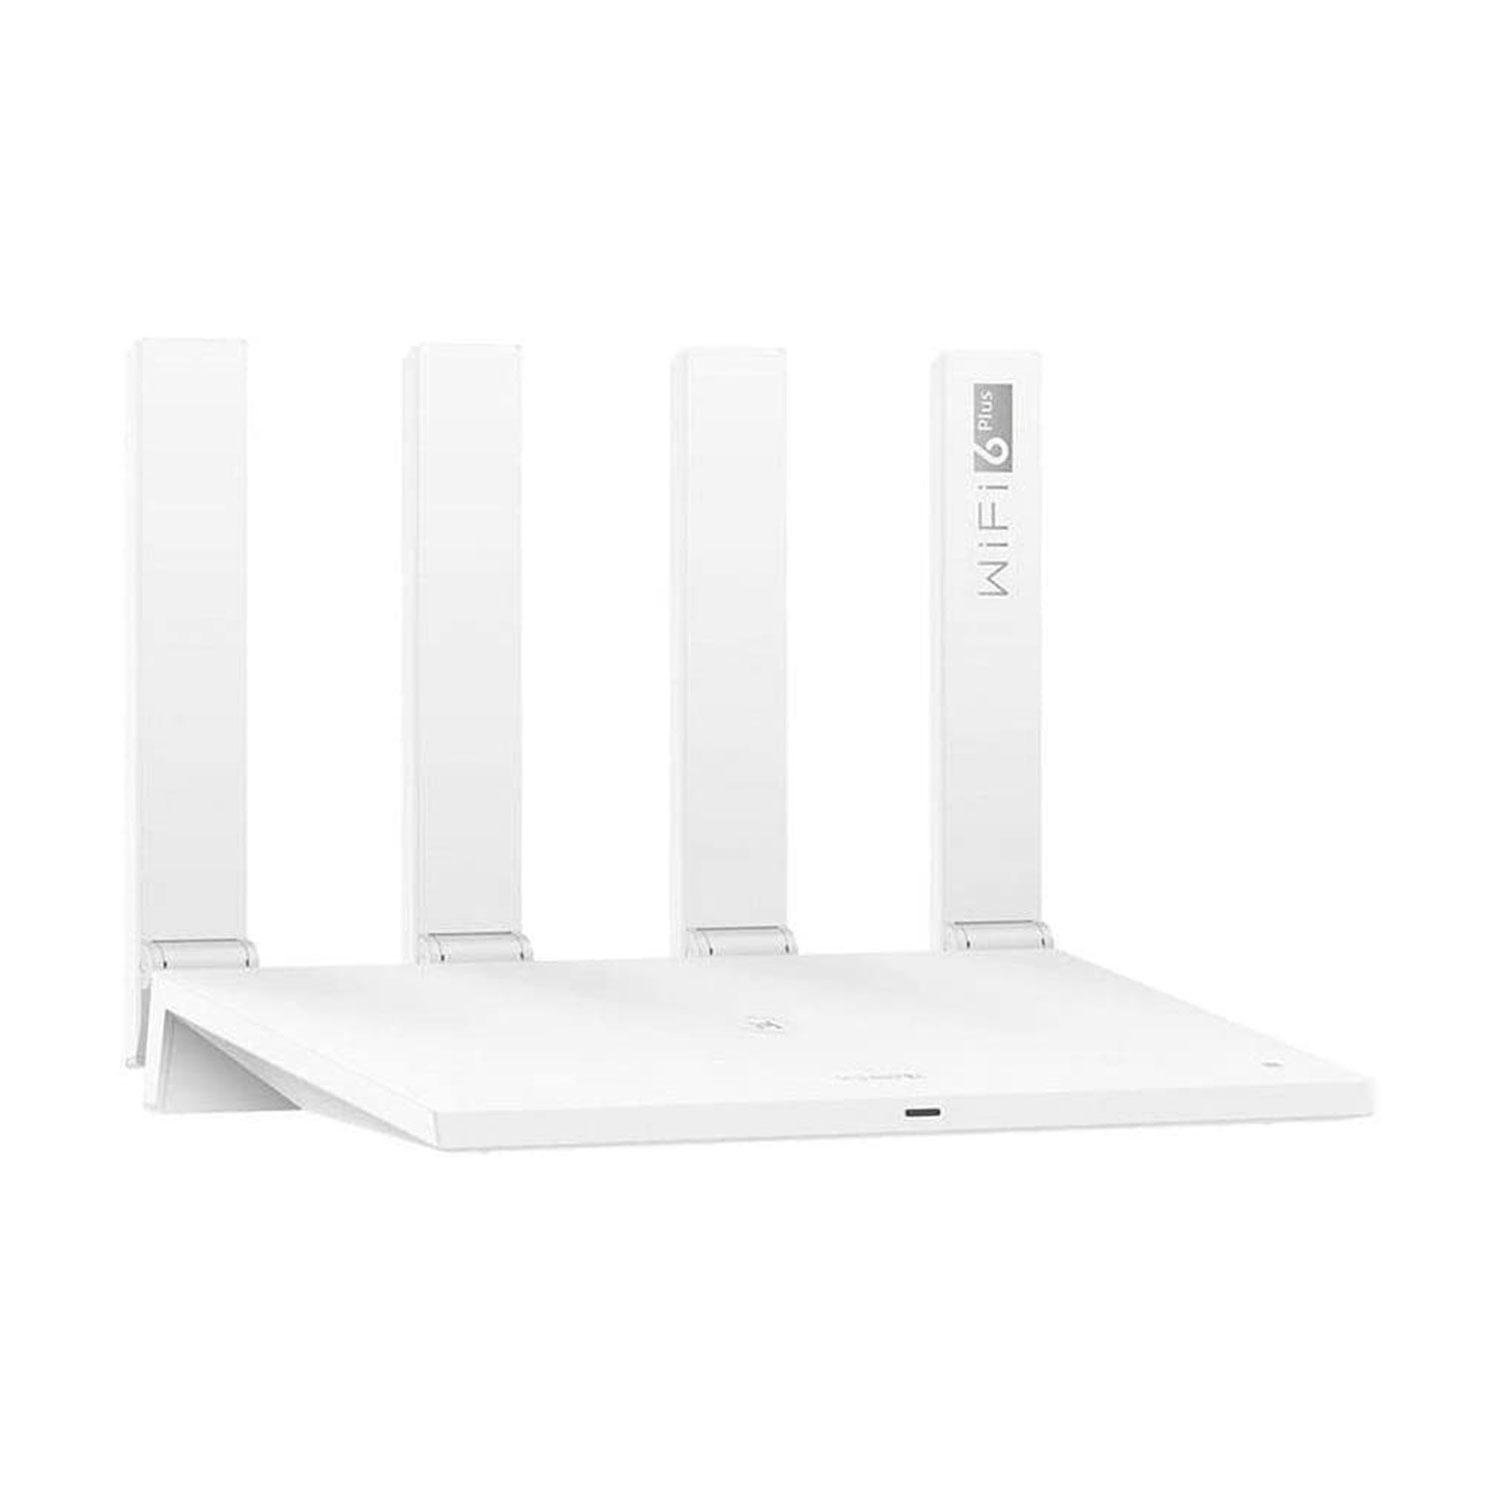 Roteador Huawei WS7200 AX3 6+3000MBPS 1.4 GHz - Branco